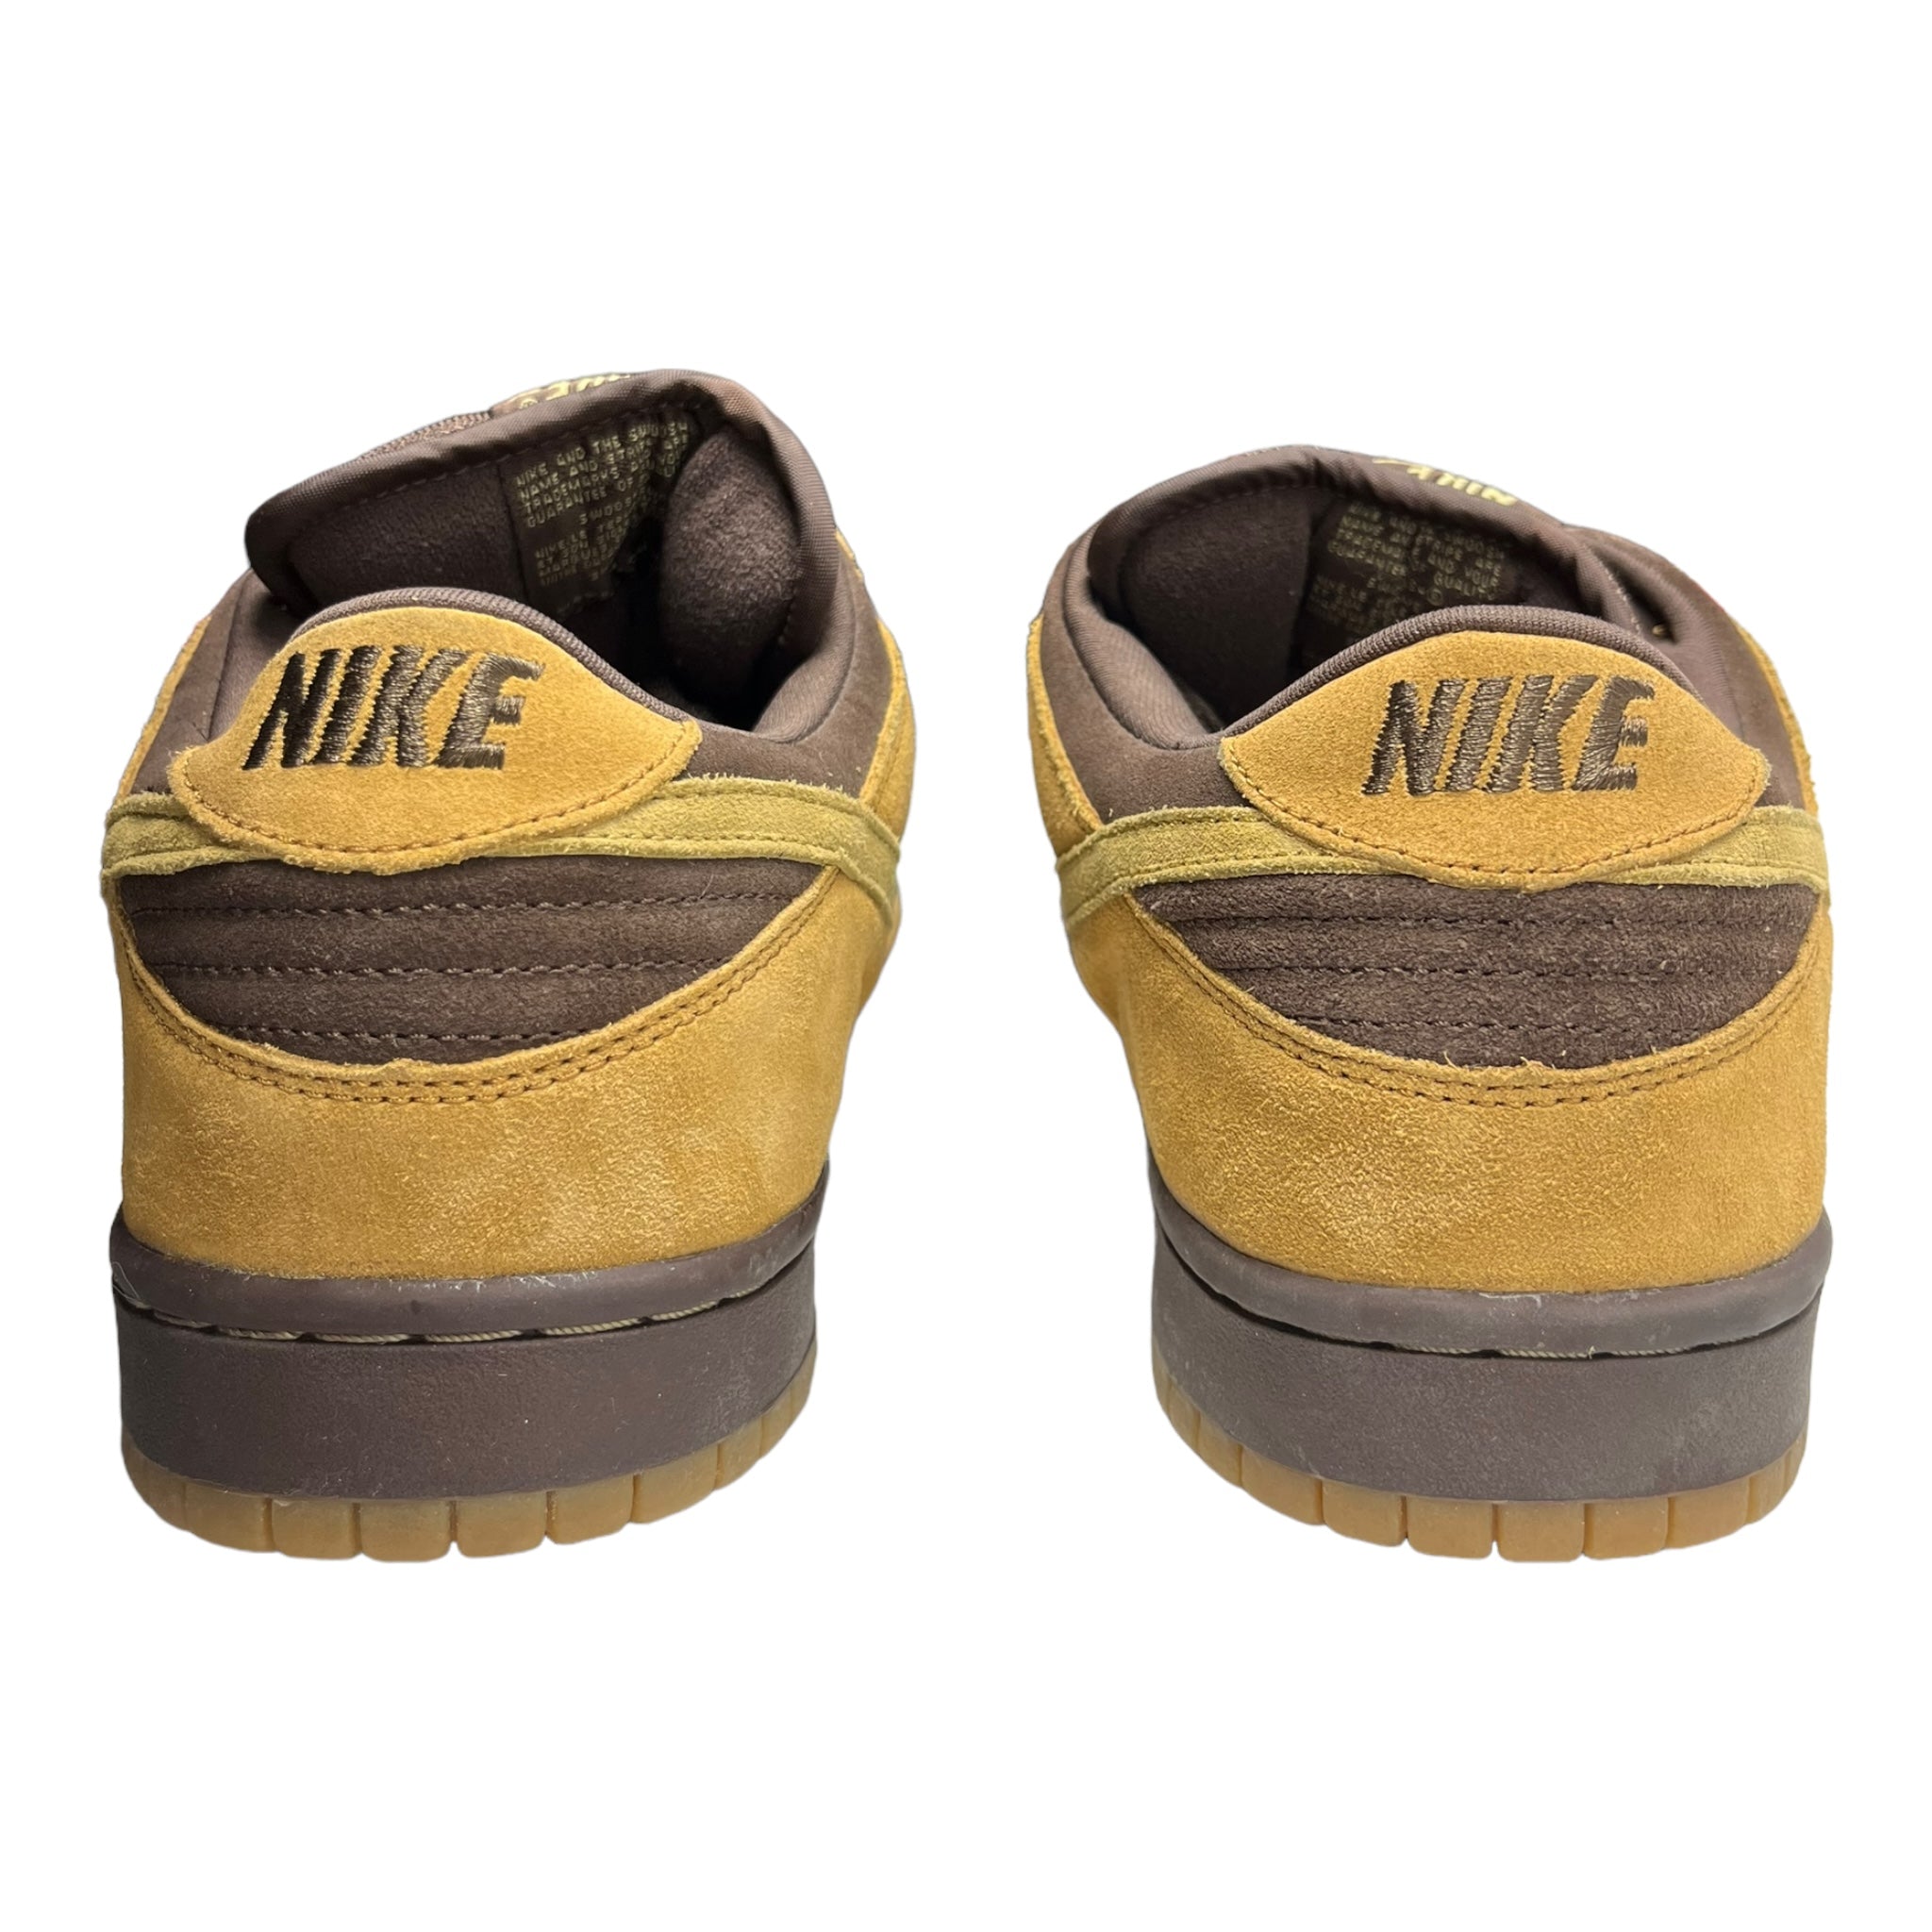 Nike SB Dunk Low Brown Pack (Used)